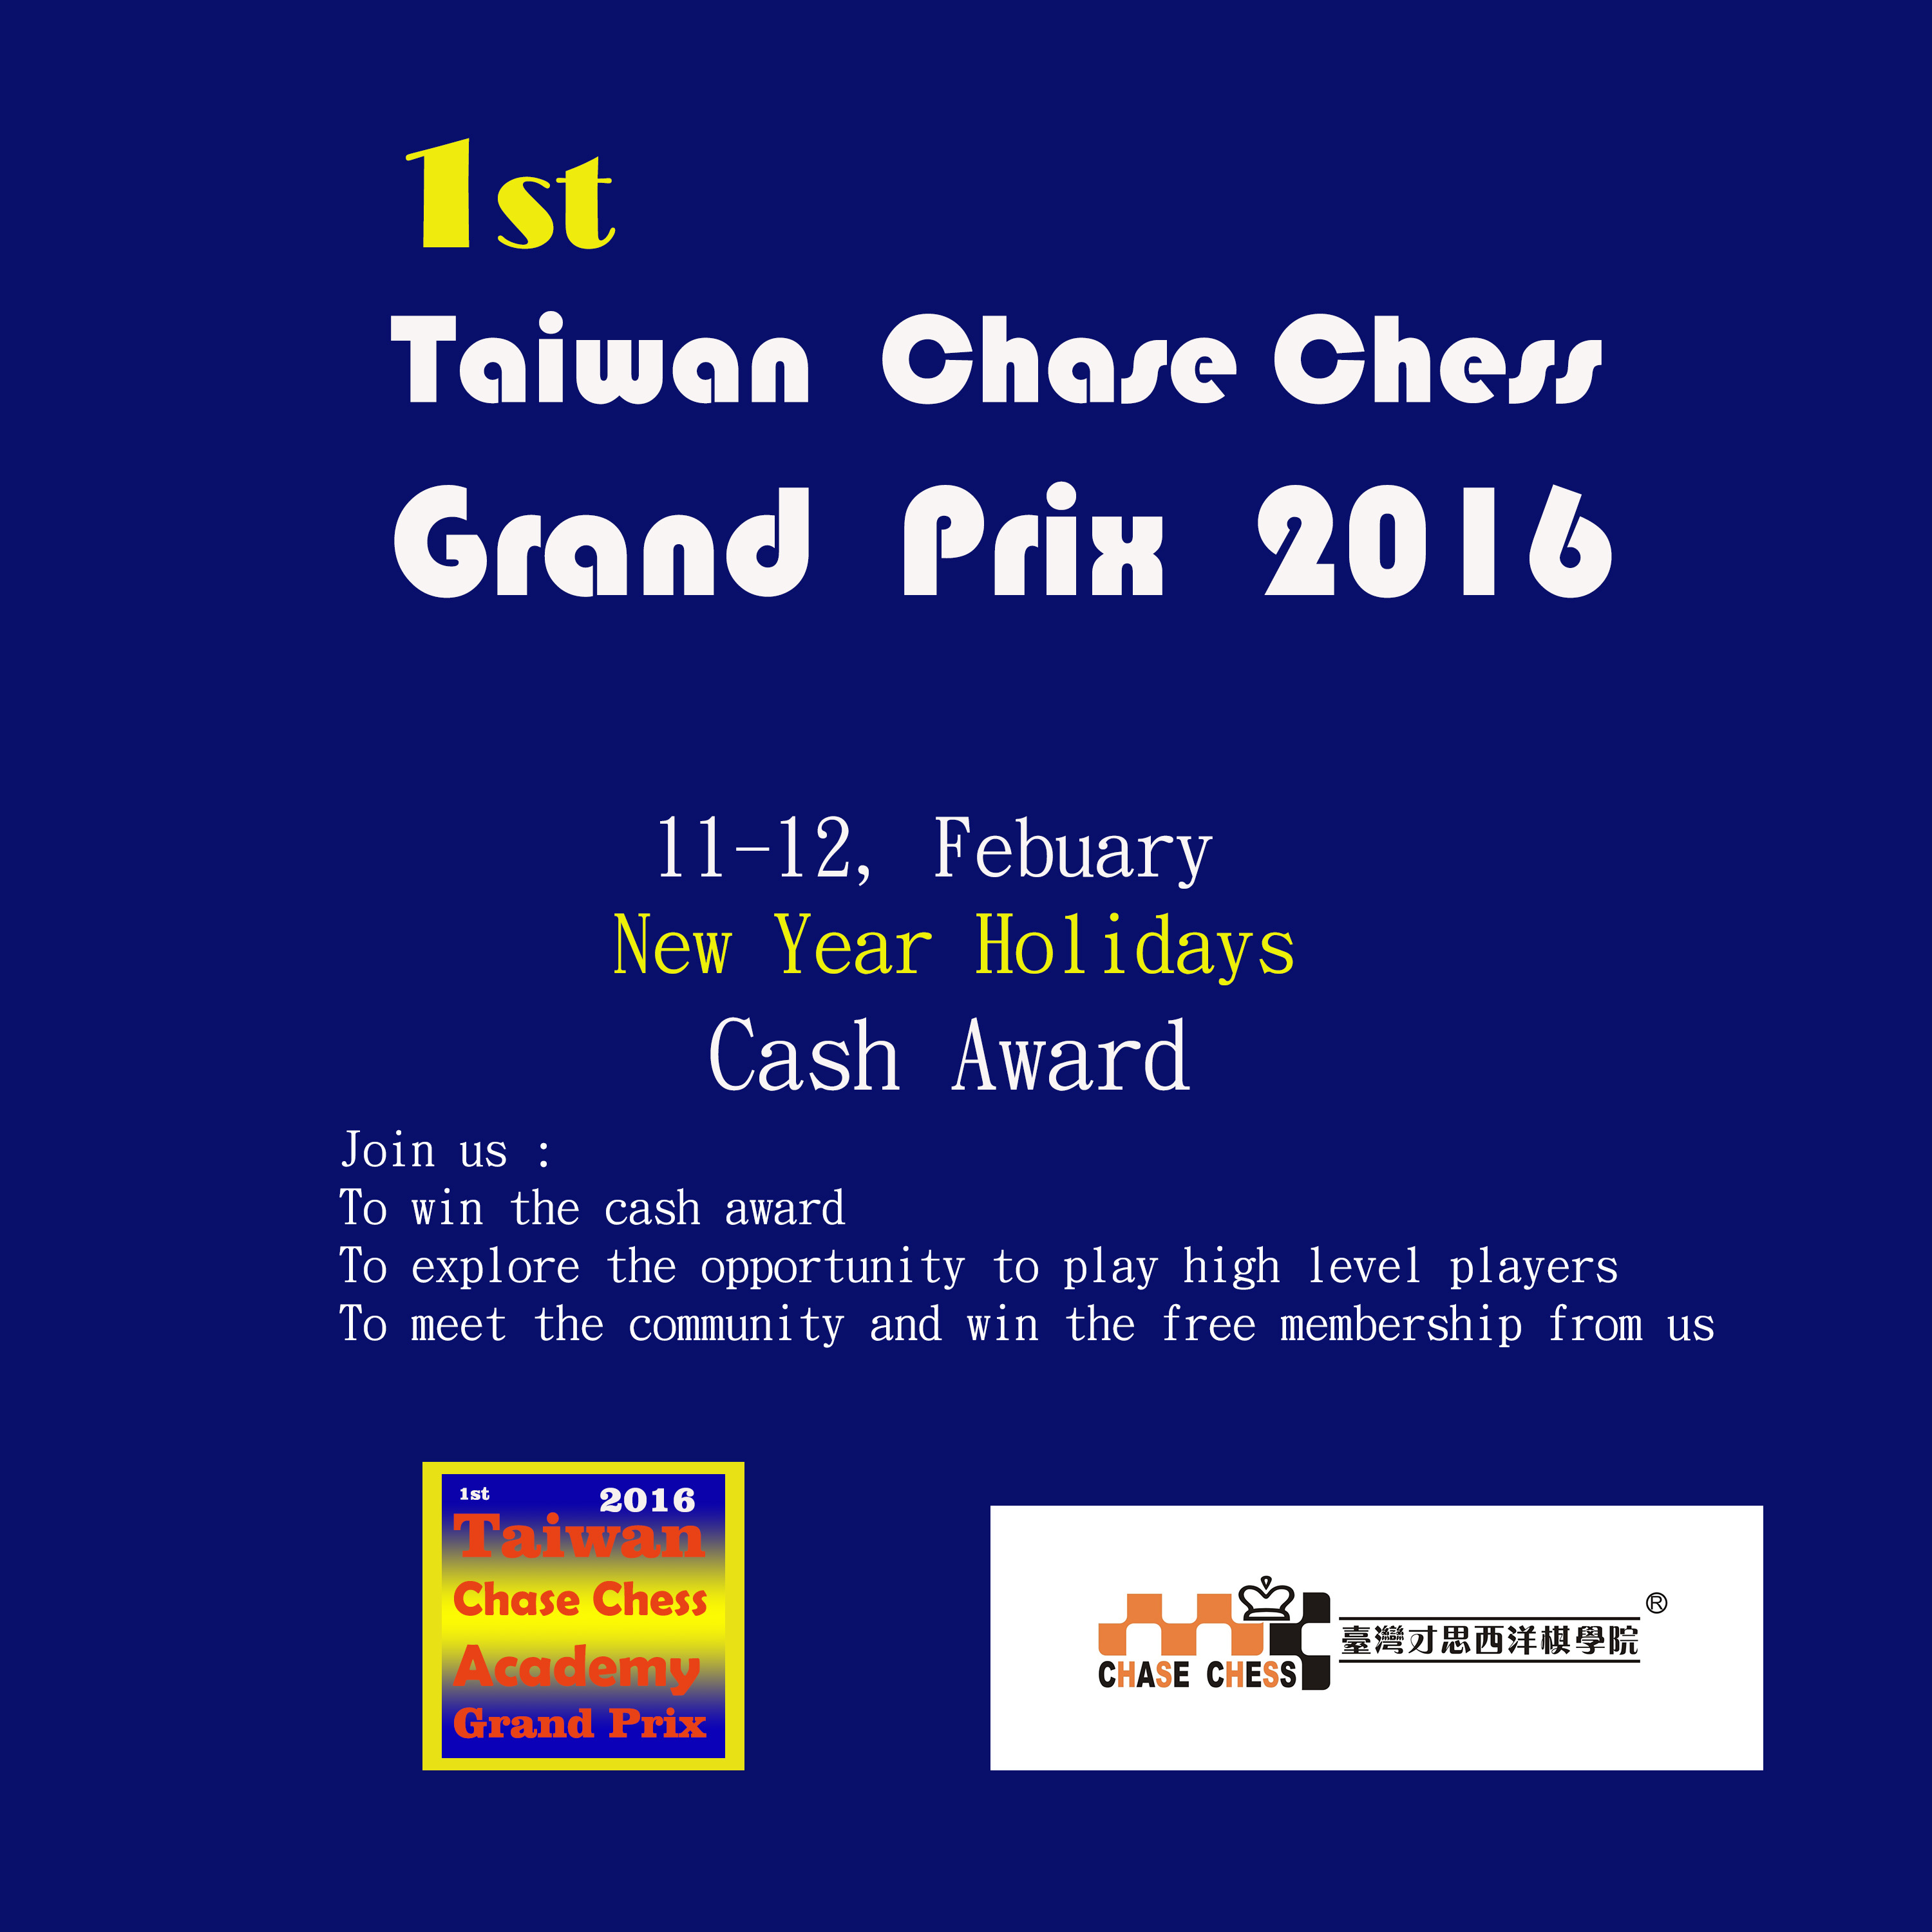 The 1st Taiwan Chase Chess Academy Grand Prix 2016 , on Feb 11-12